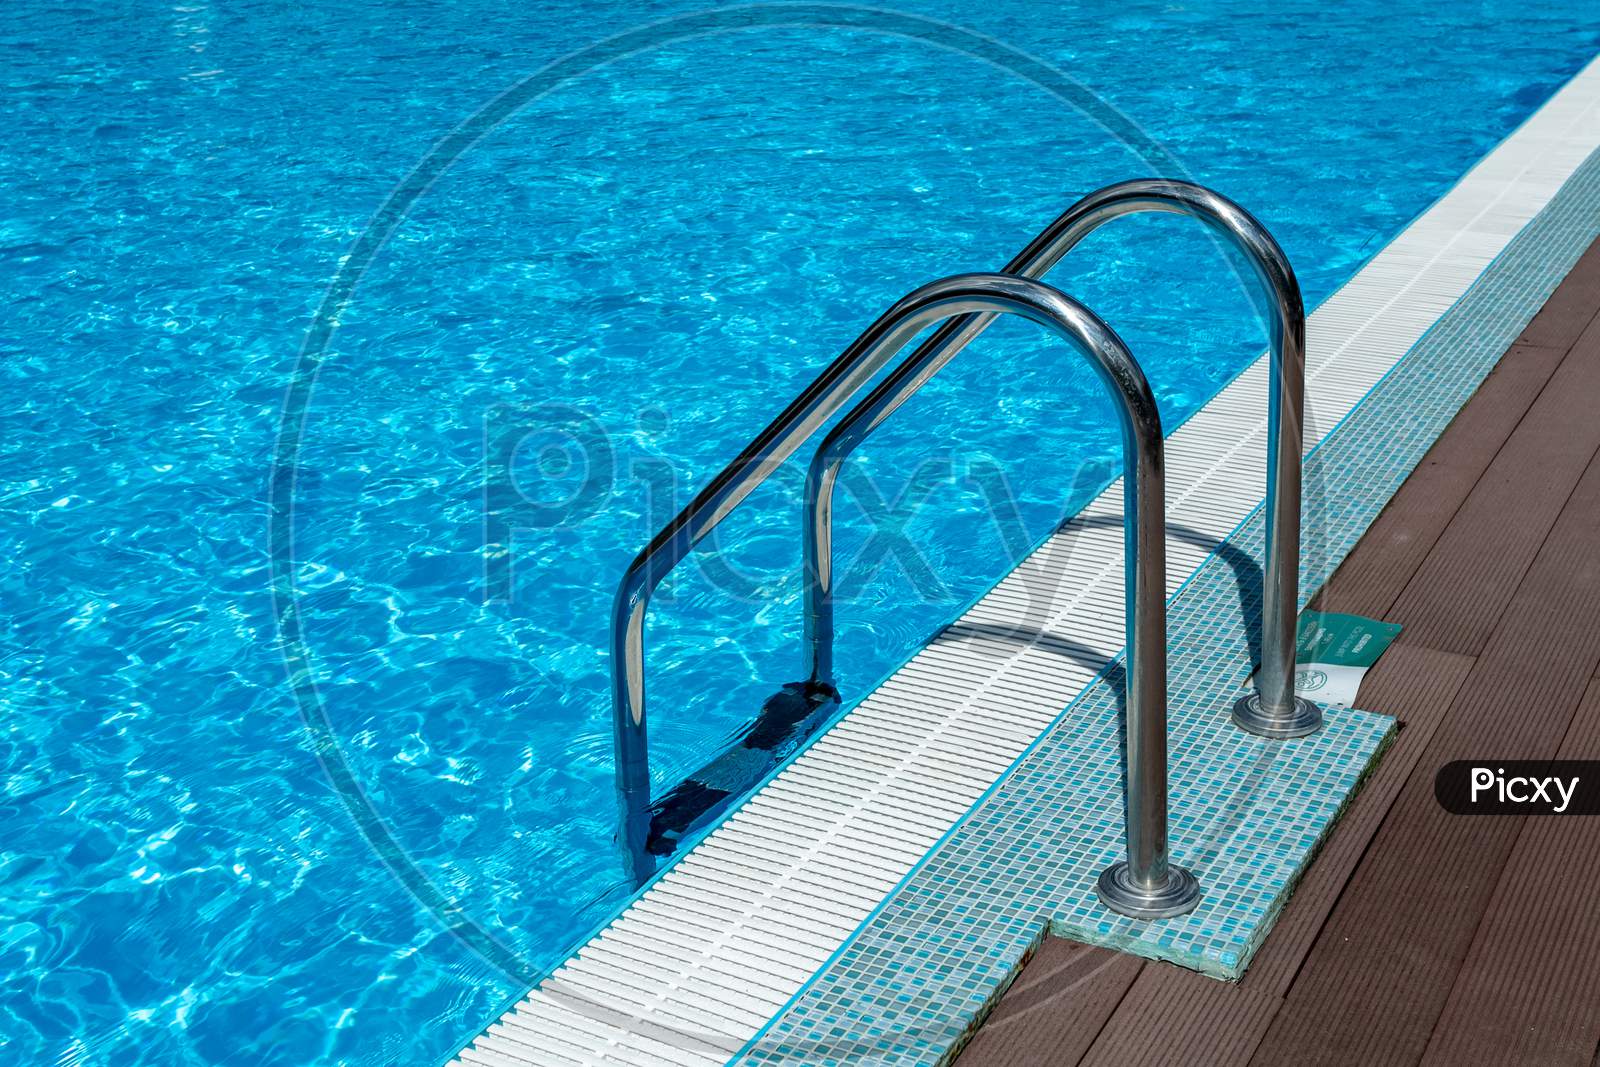 Handrail On Pool. Swimming Pool With Stair At Tropical Resort. Water Swimming Pool With Sunny Reflection. Steel Handrail, Swimming, Summer, Travel. Entry To Pool With Handrail.